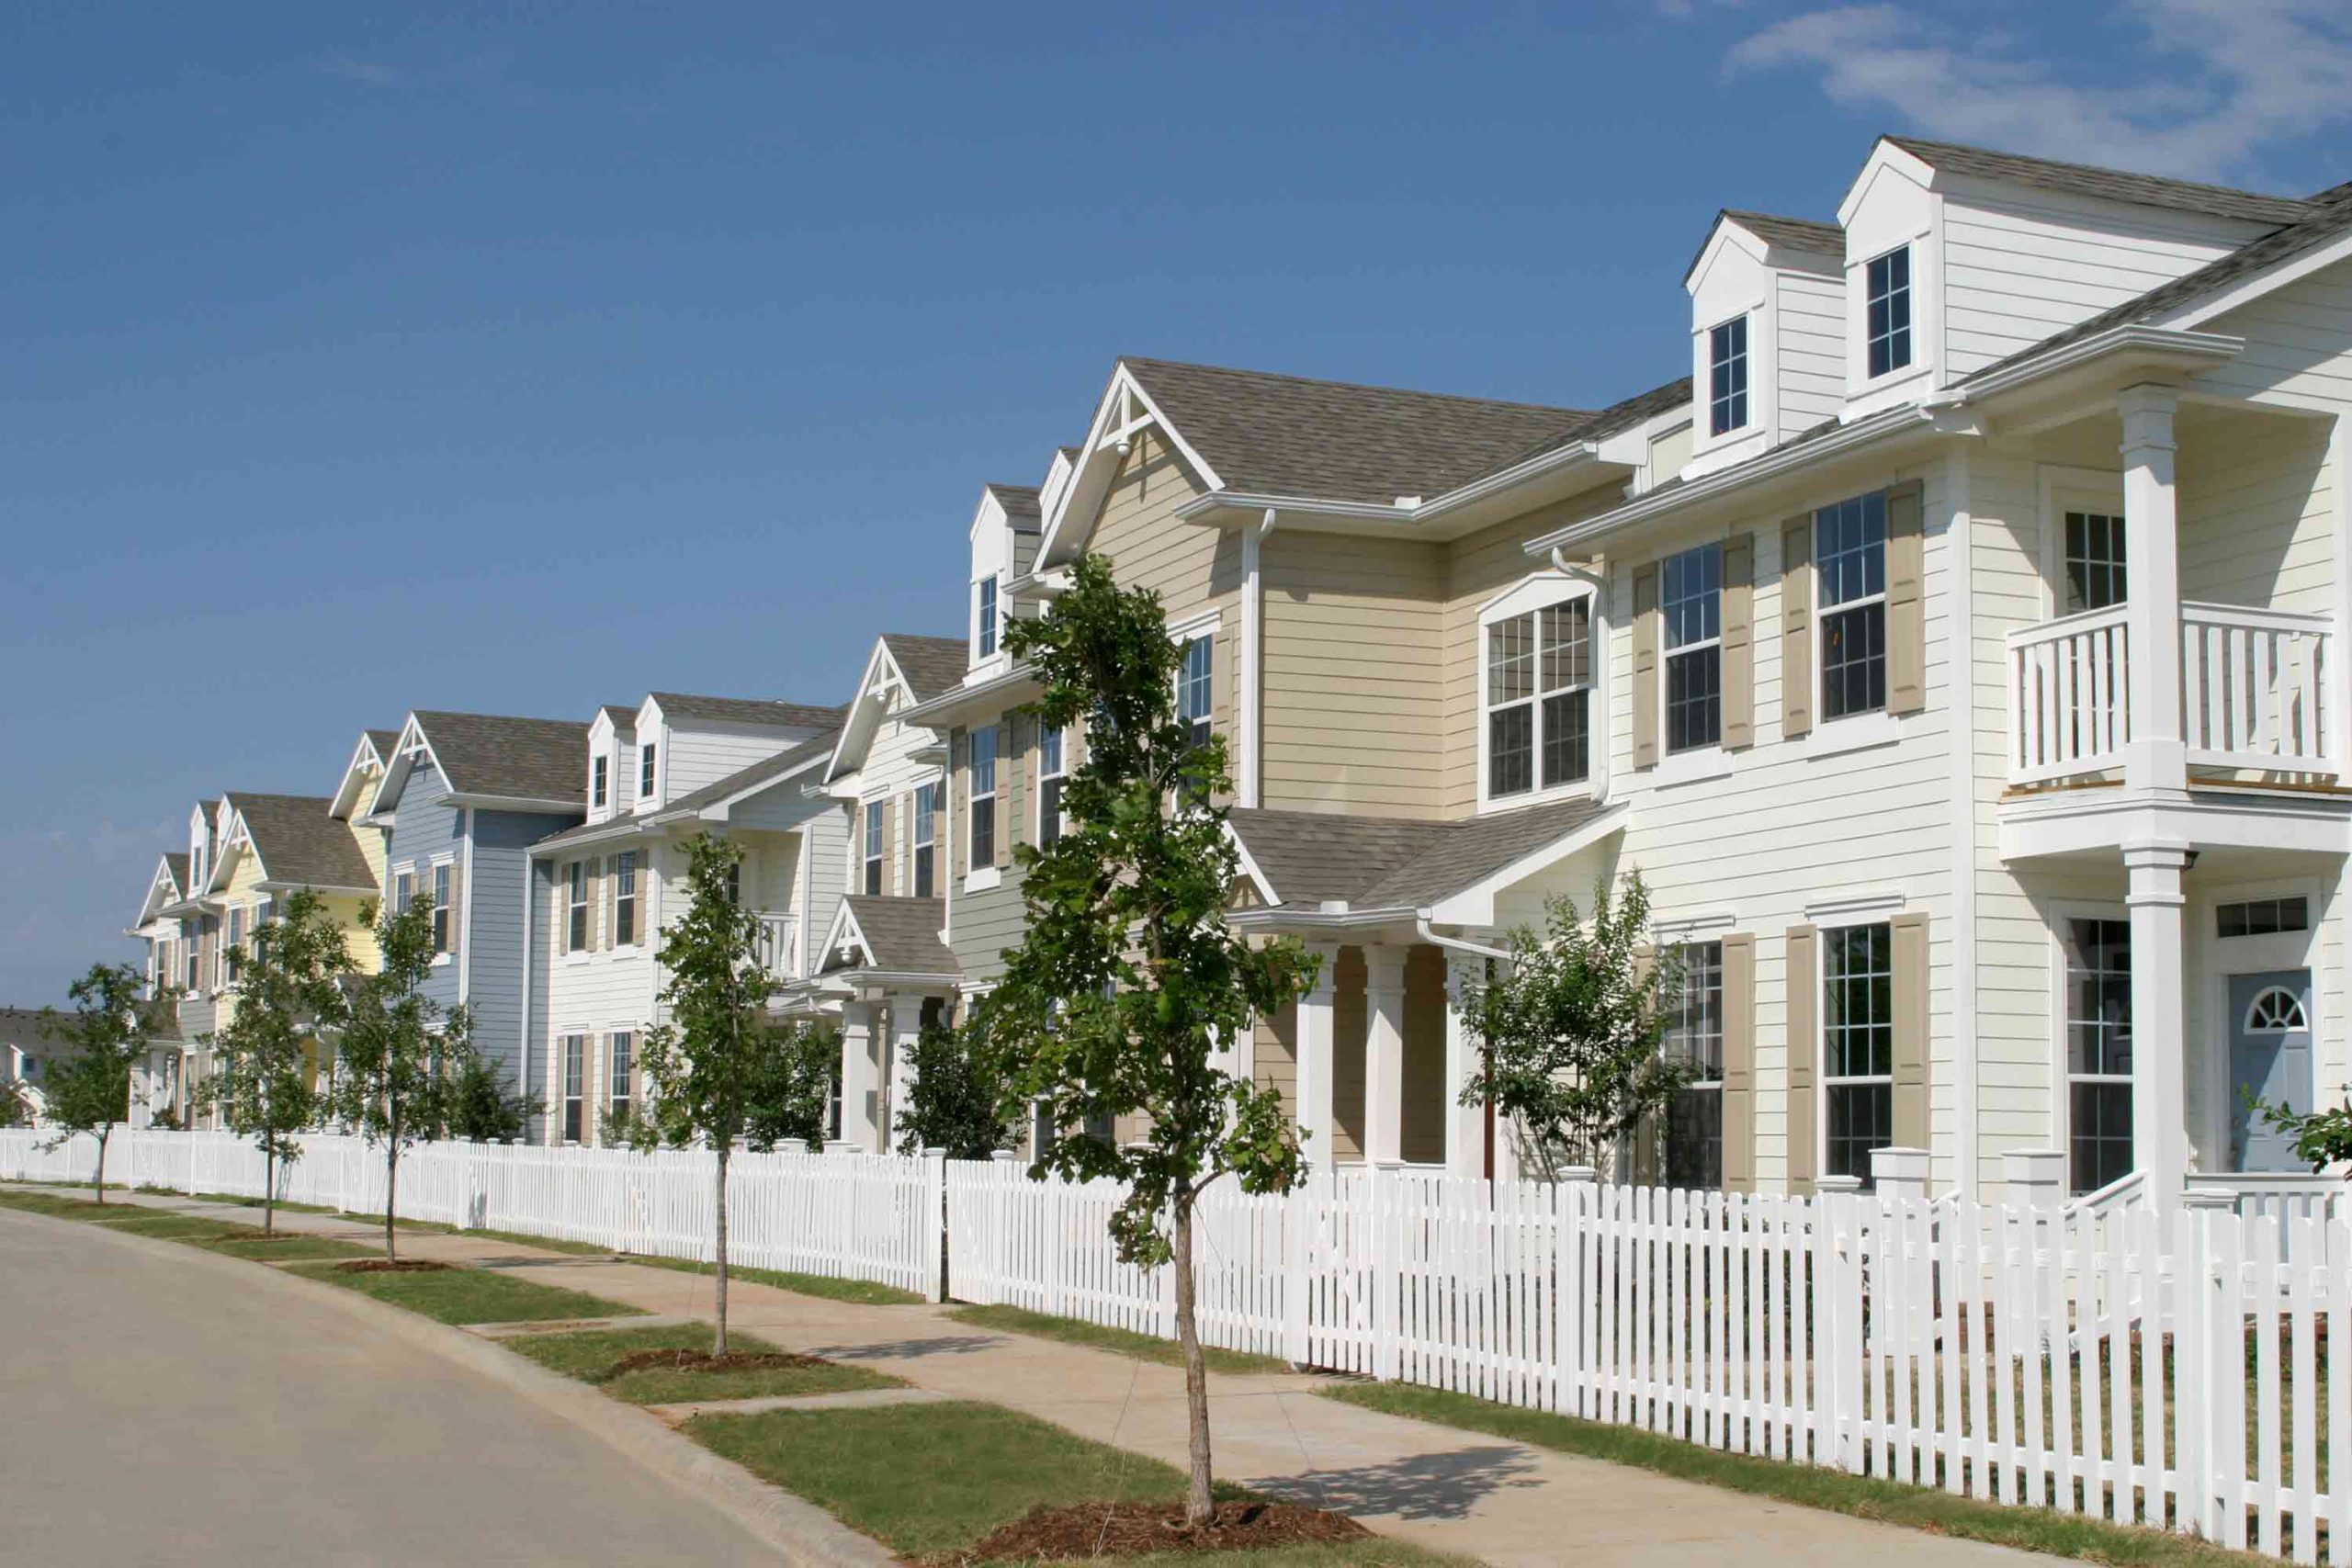 row of homes - Rentals Available Greeley - Looking For a House For Rent Near UNC?